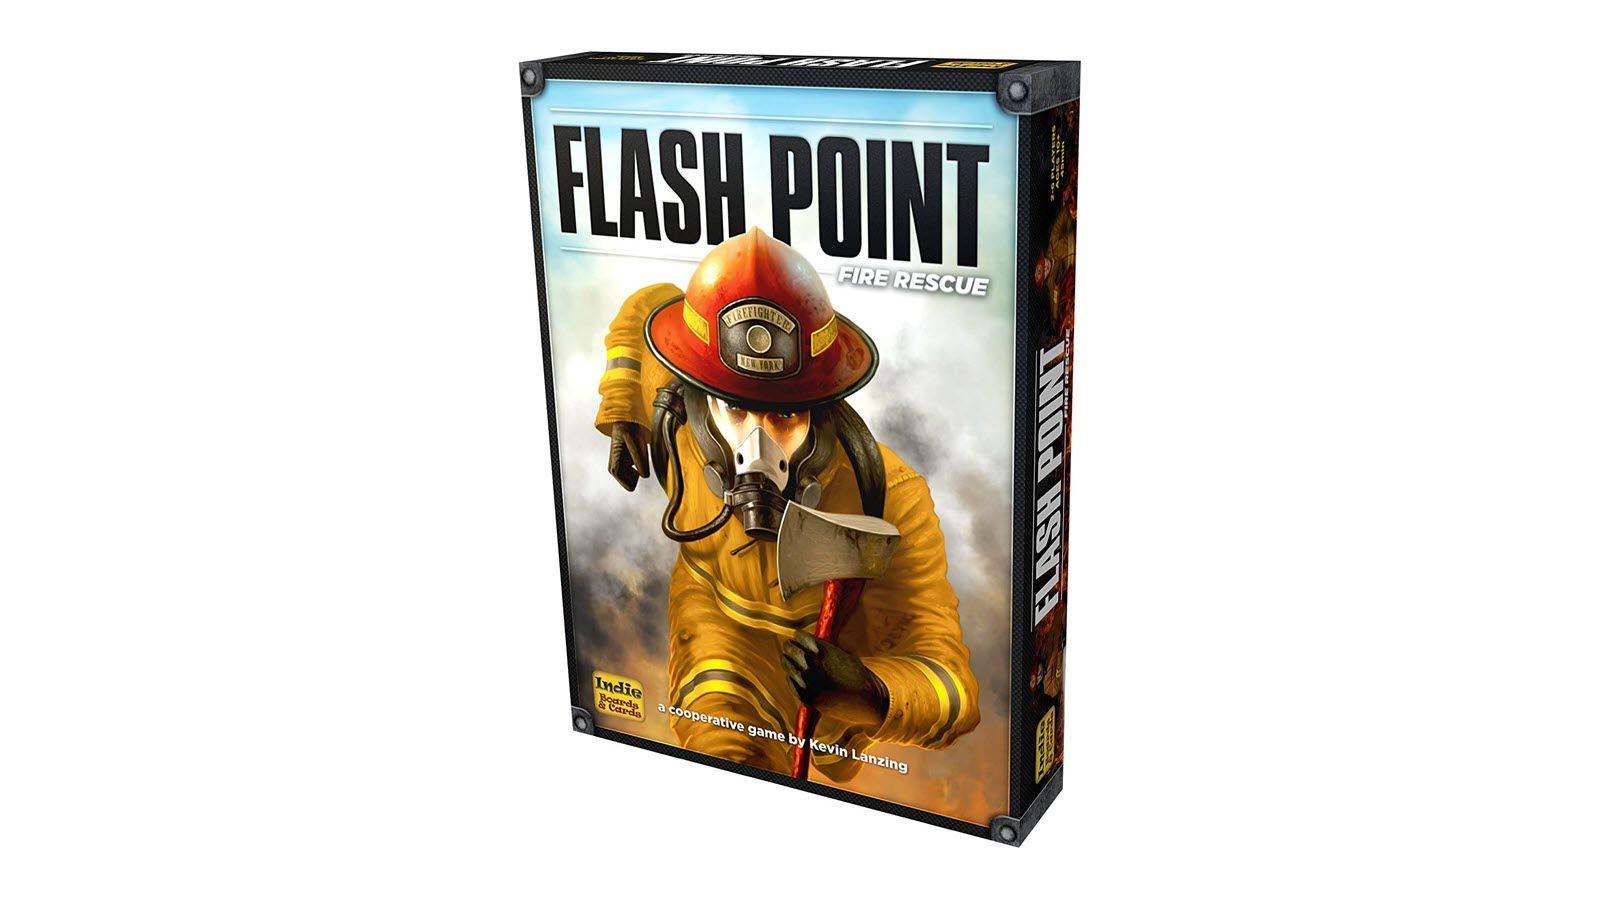 The Flash Point Fire Rescue game box featuring a firefighter holding an axe.